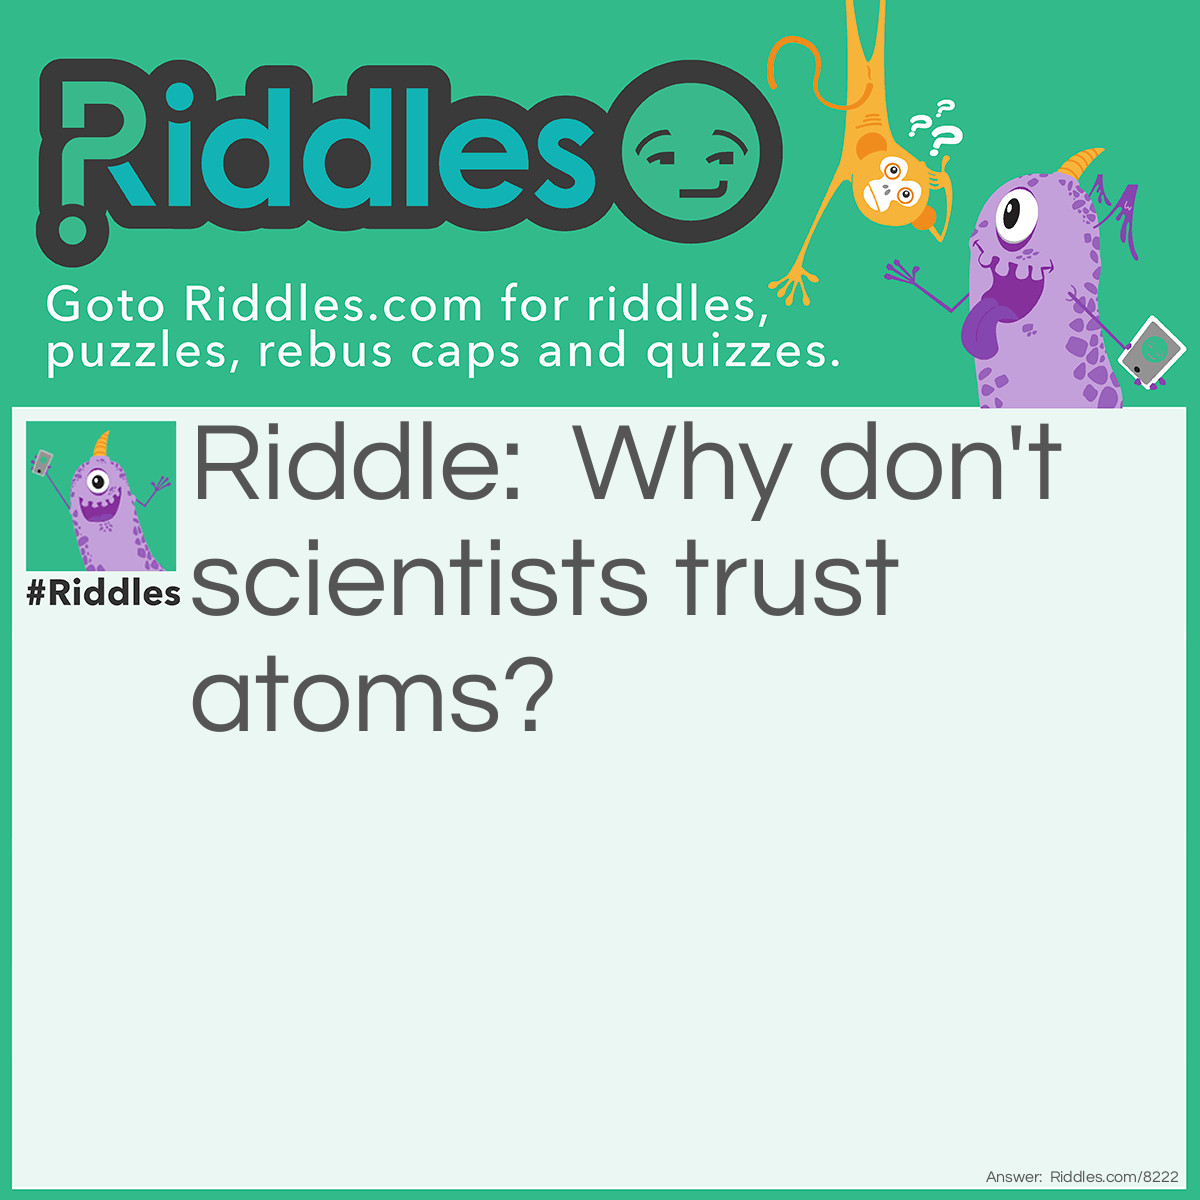 Riddle: Why don't scientists trust atoms? Answer: Because they make up everything.